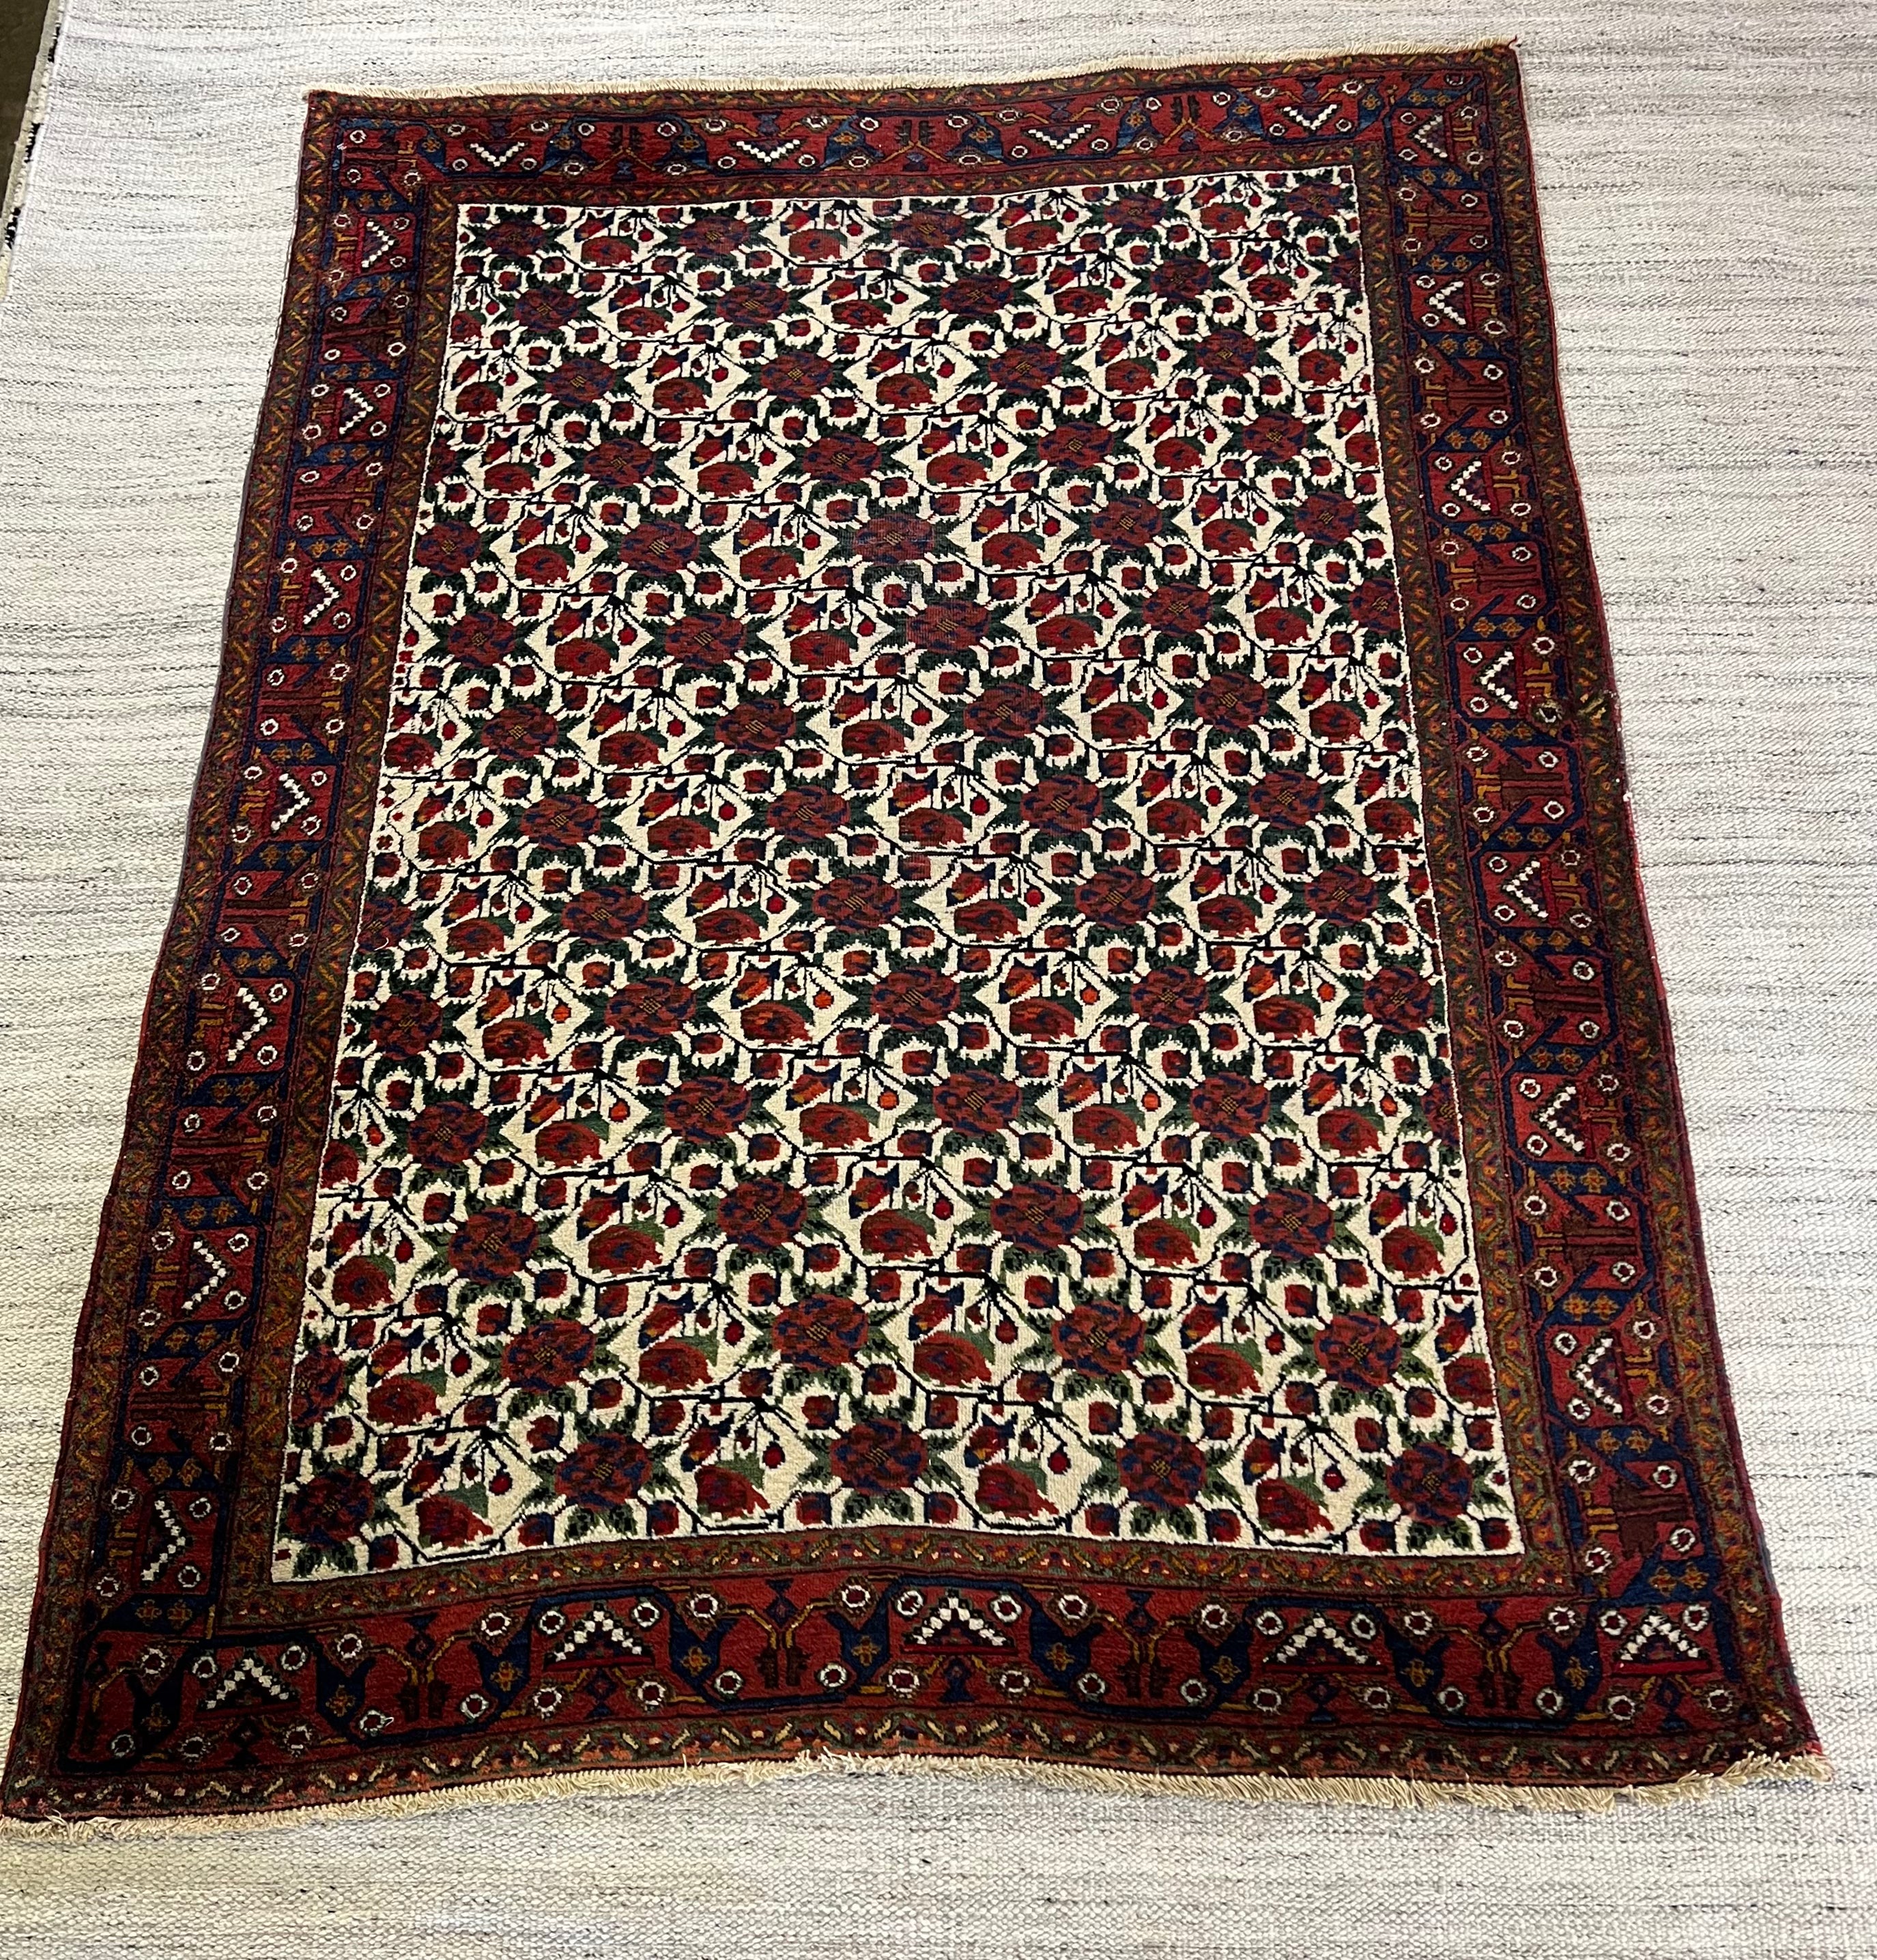 Antique Afshar 5.0x6.8 Southeast Persia Rug Red and Green